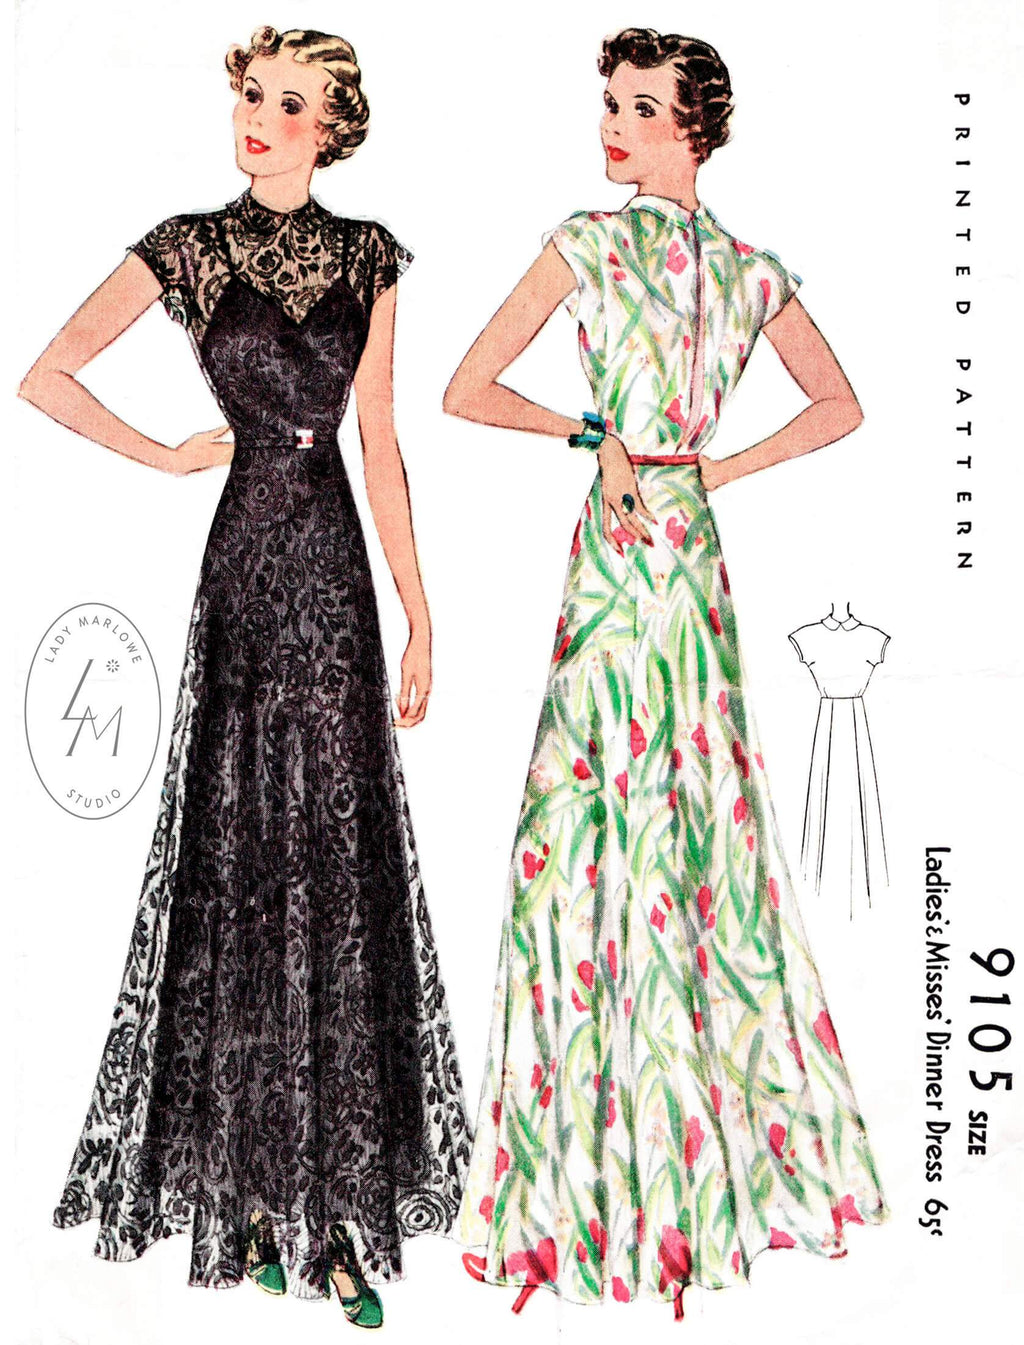 McCall 9105 1937 1930s evening gown vintage sewing pattern repro